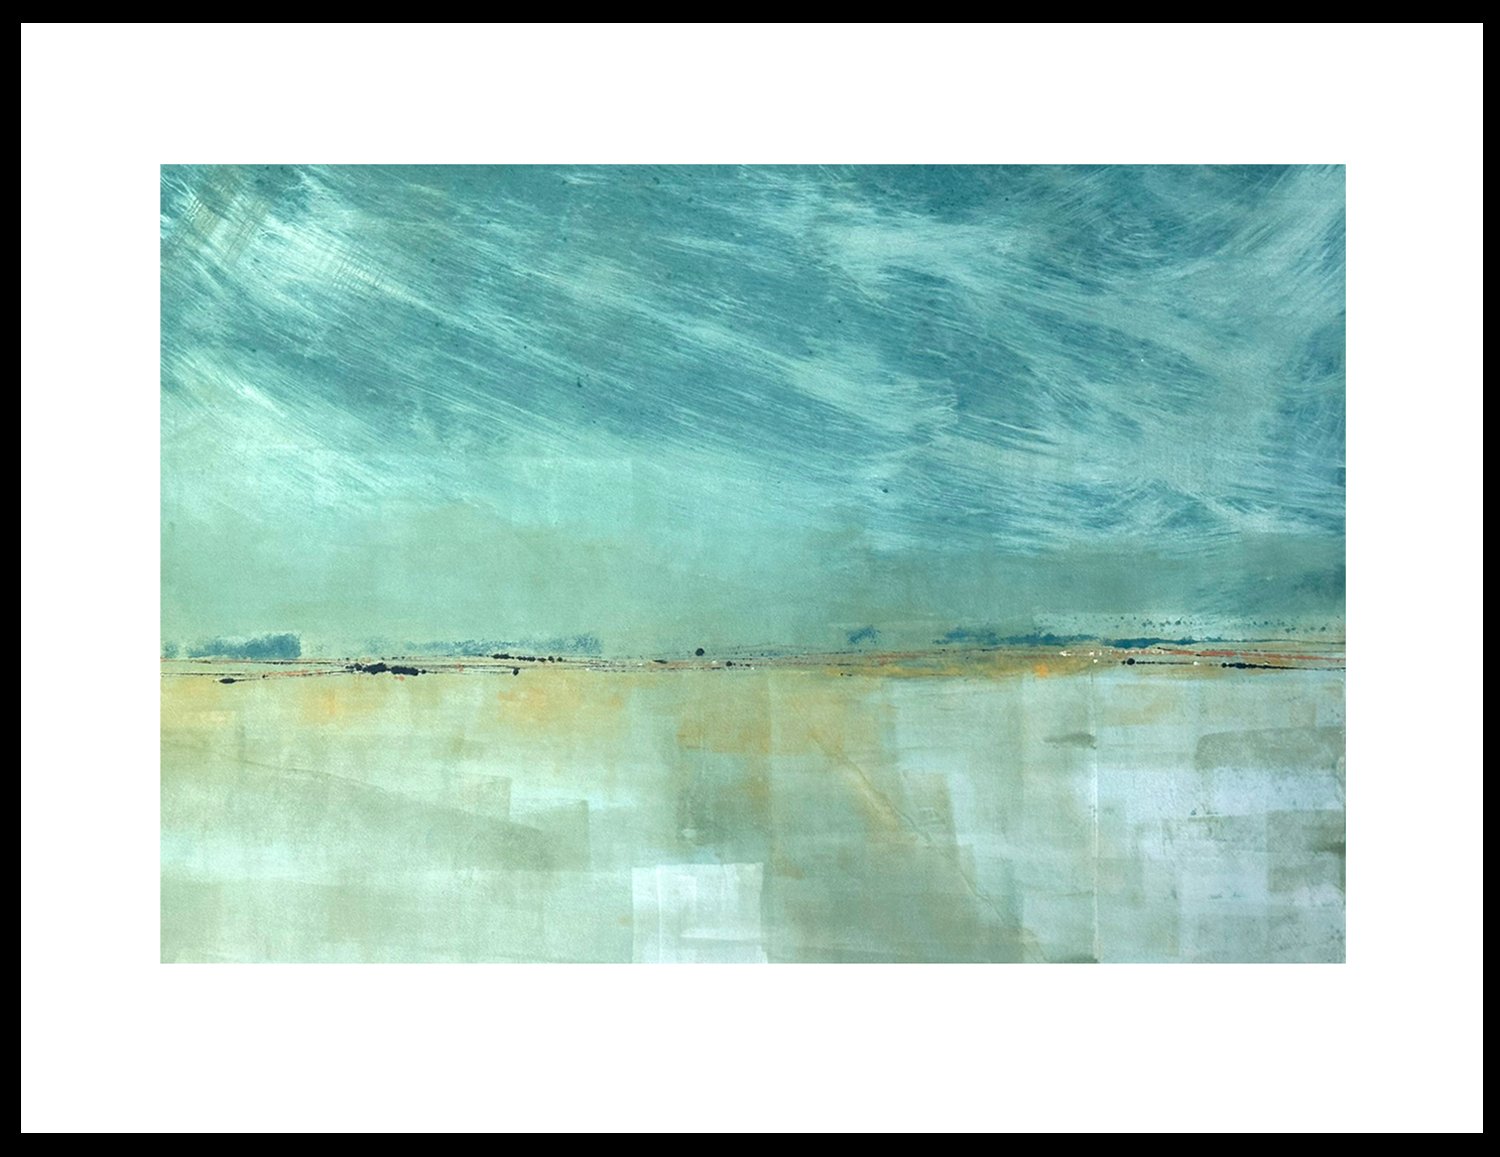    "Poetry in Silence"   is a monotype that captures the essence of quiet contemplation. A wash of soft blues and greens lays the foundation, like a calm ocean or peaceful sky at dusk. The interplay between the colors and lines creates a sense of qui